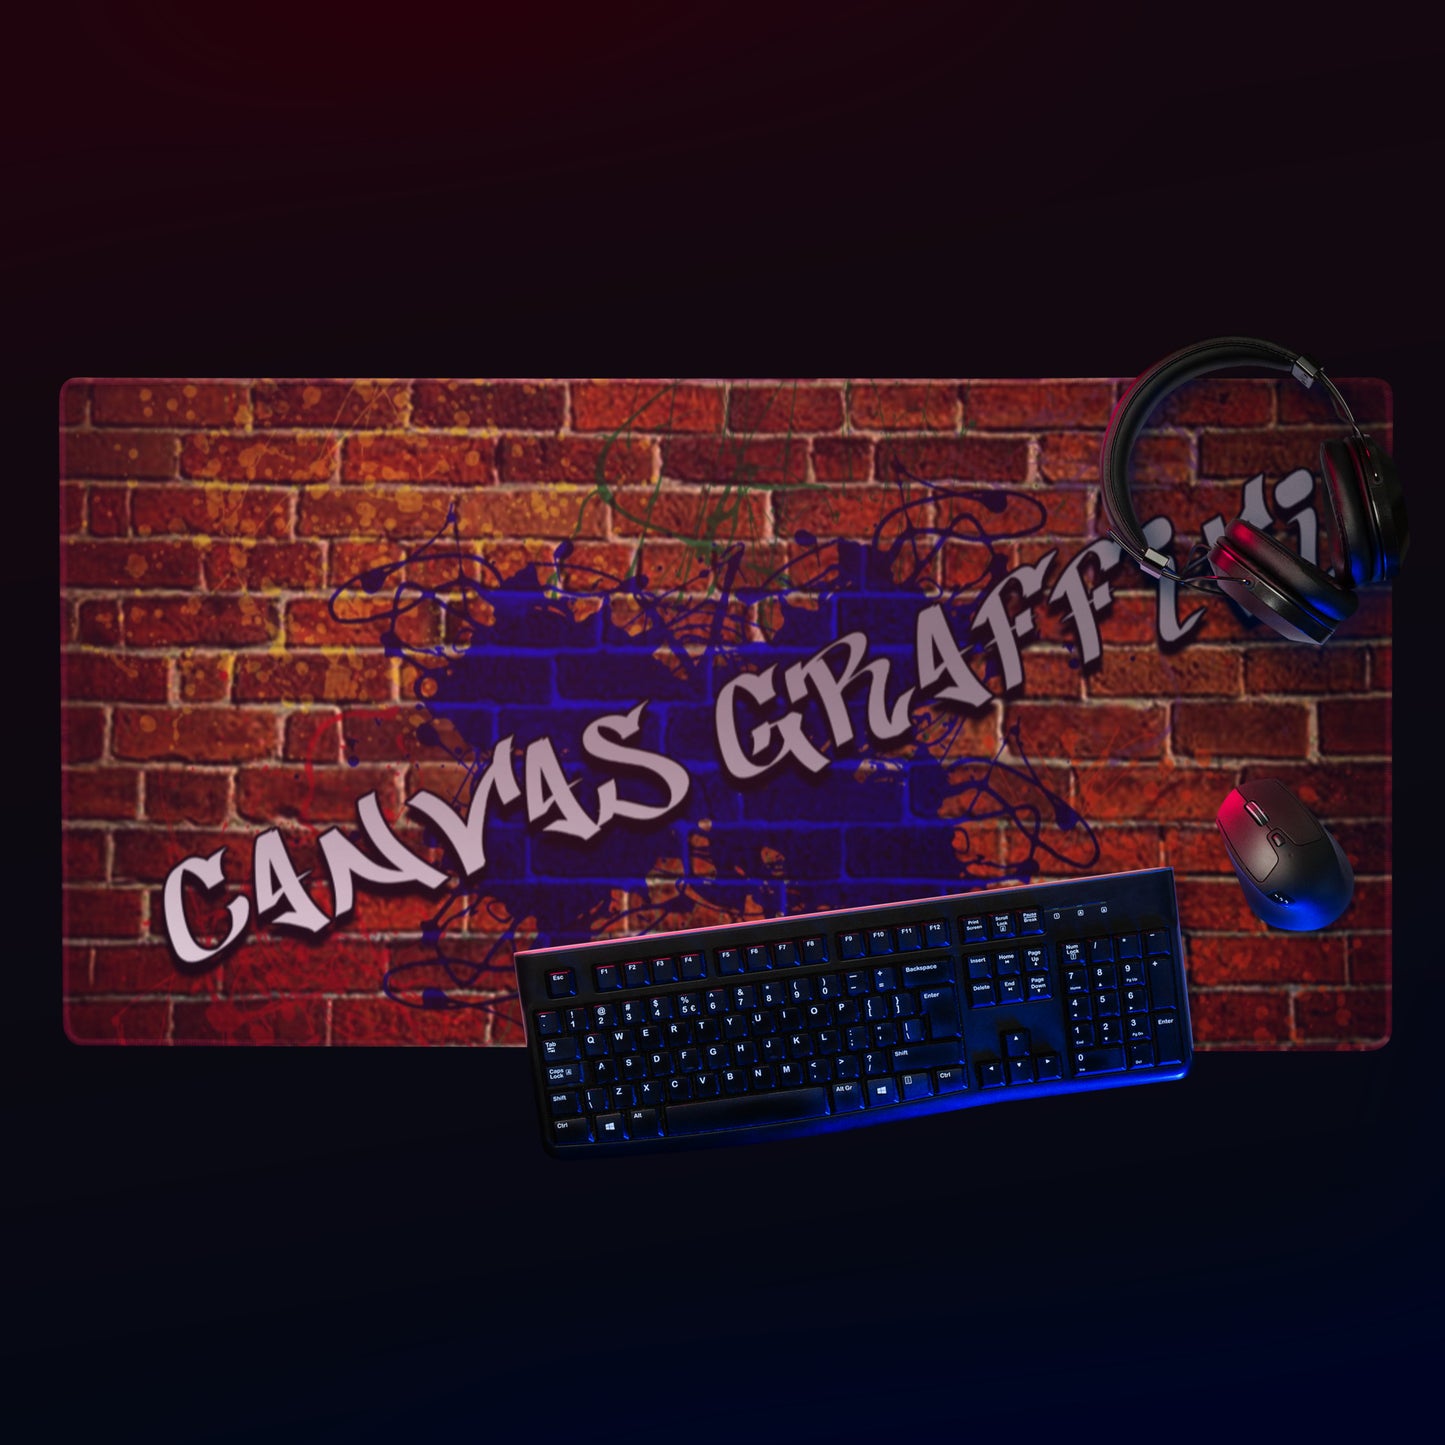 Gaming mouse pad Canvas Graffitti